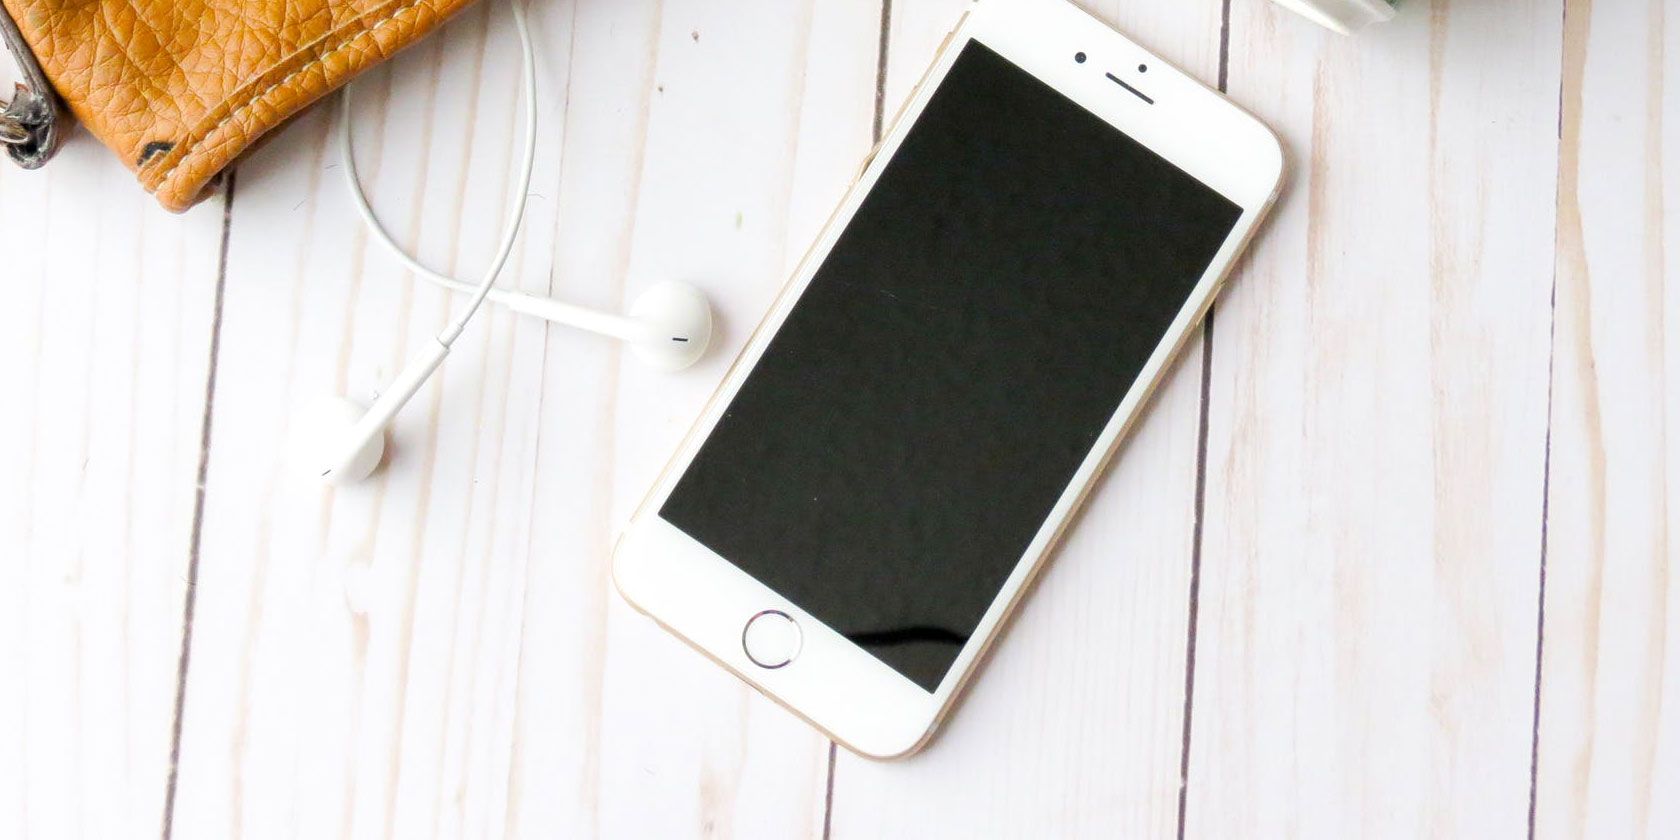 7 Fixes for an iPhone Stuck in Headphone Mode